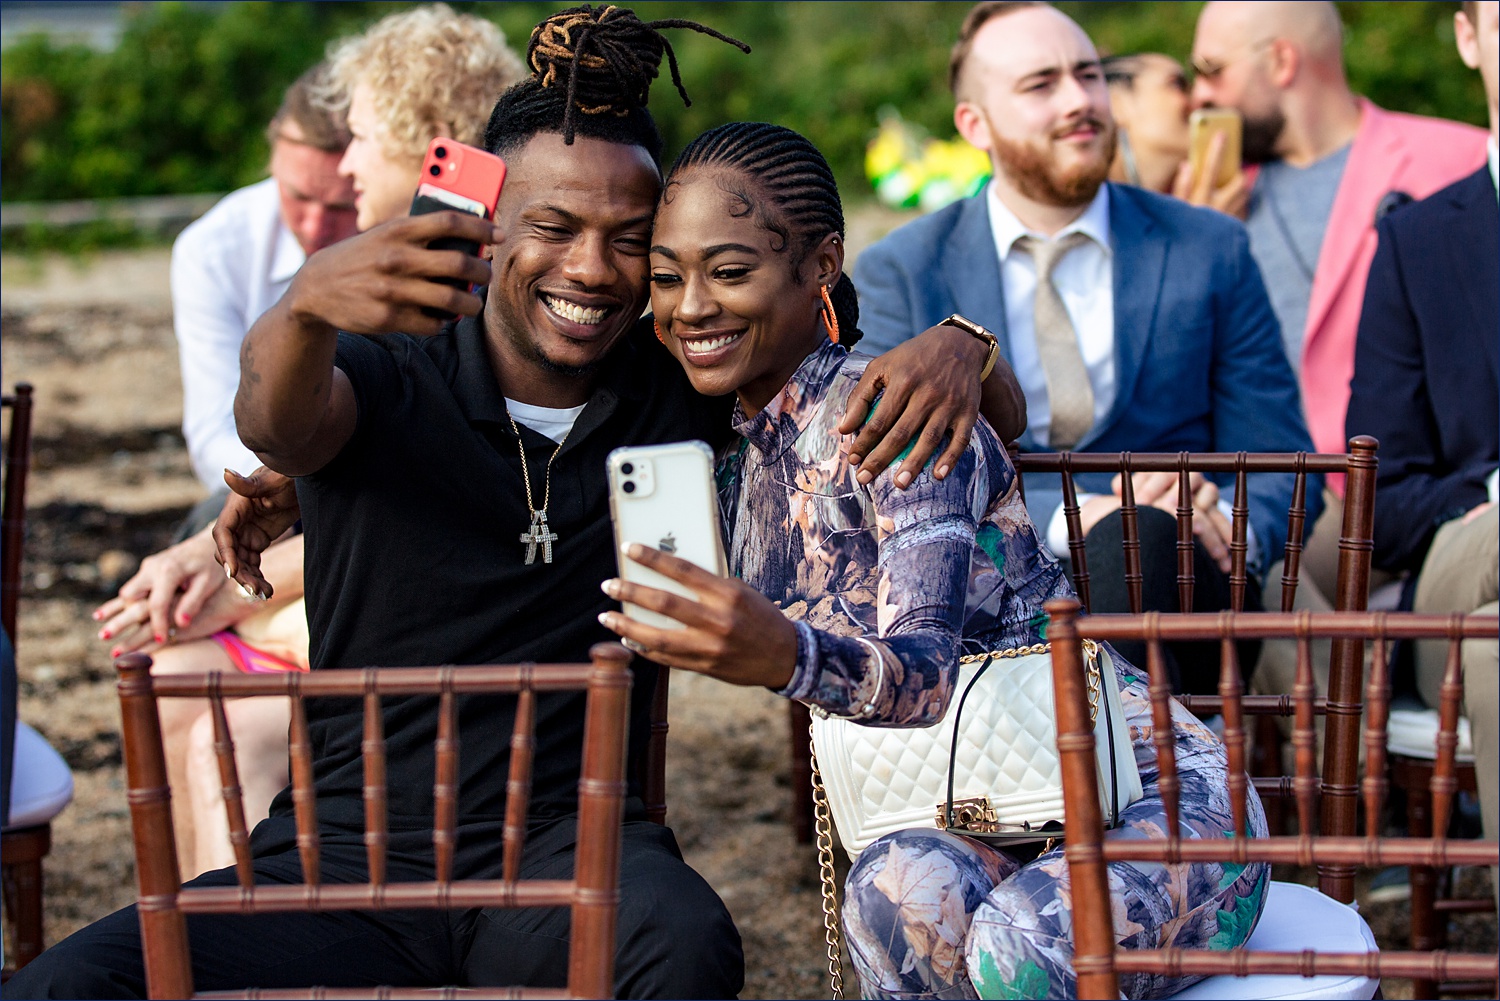 Guests take selfies while waiting for the beach ceremony to begin